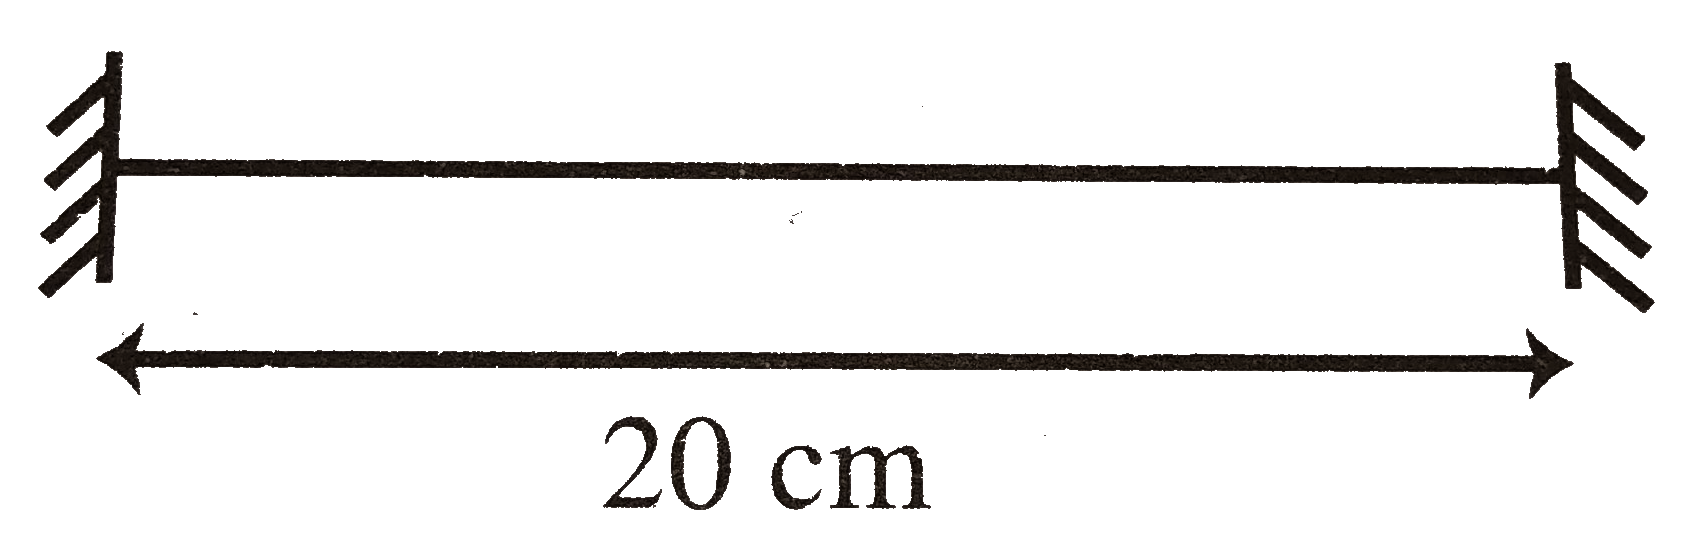 A 20 cm long string, having a mass of 1.0 g, is fixed at both the ends. The tension in the string is 0.5 N. The string is set into vibrations using an external vibrator of frequency 100 Hz Find the separation (in cm) between the successive nodes on the string.   .